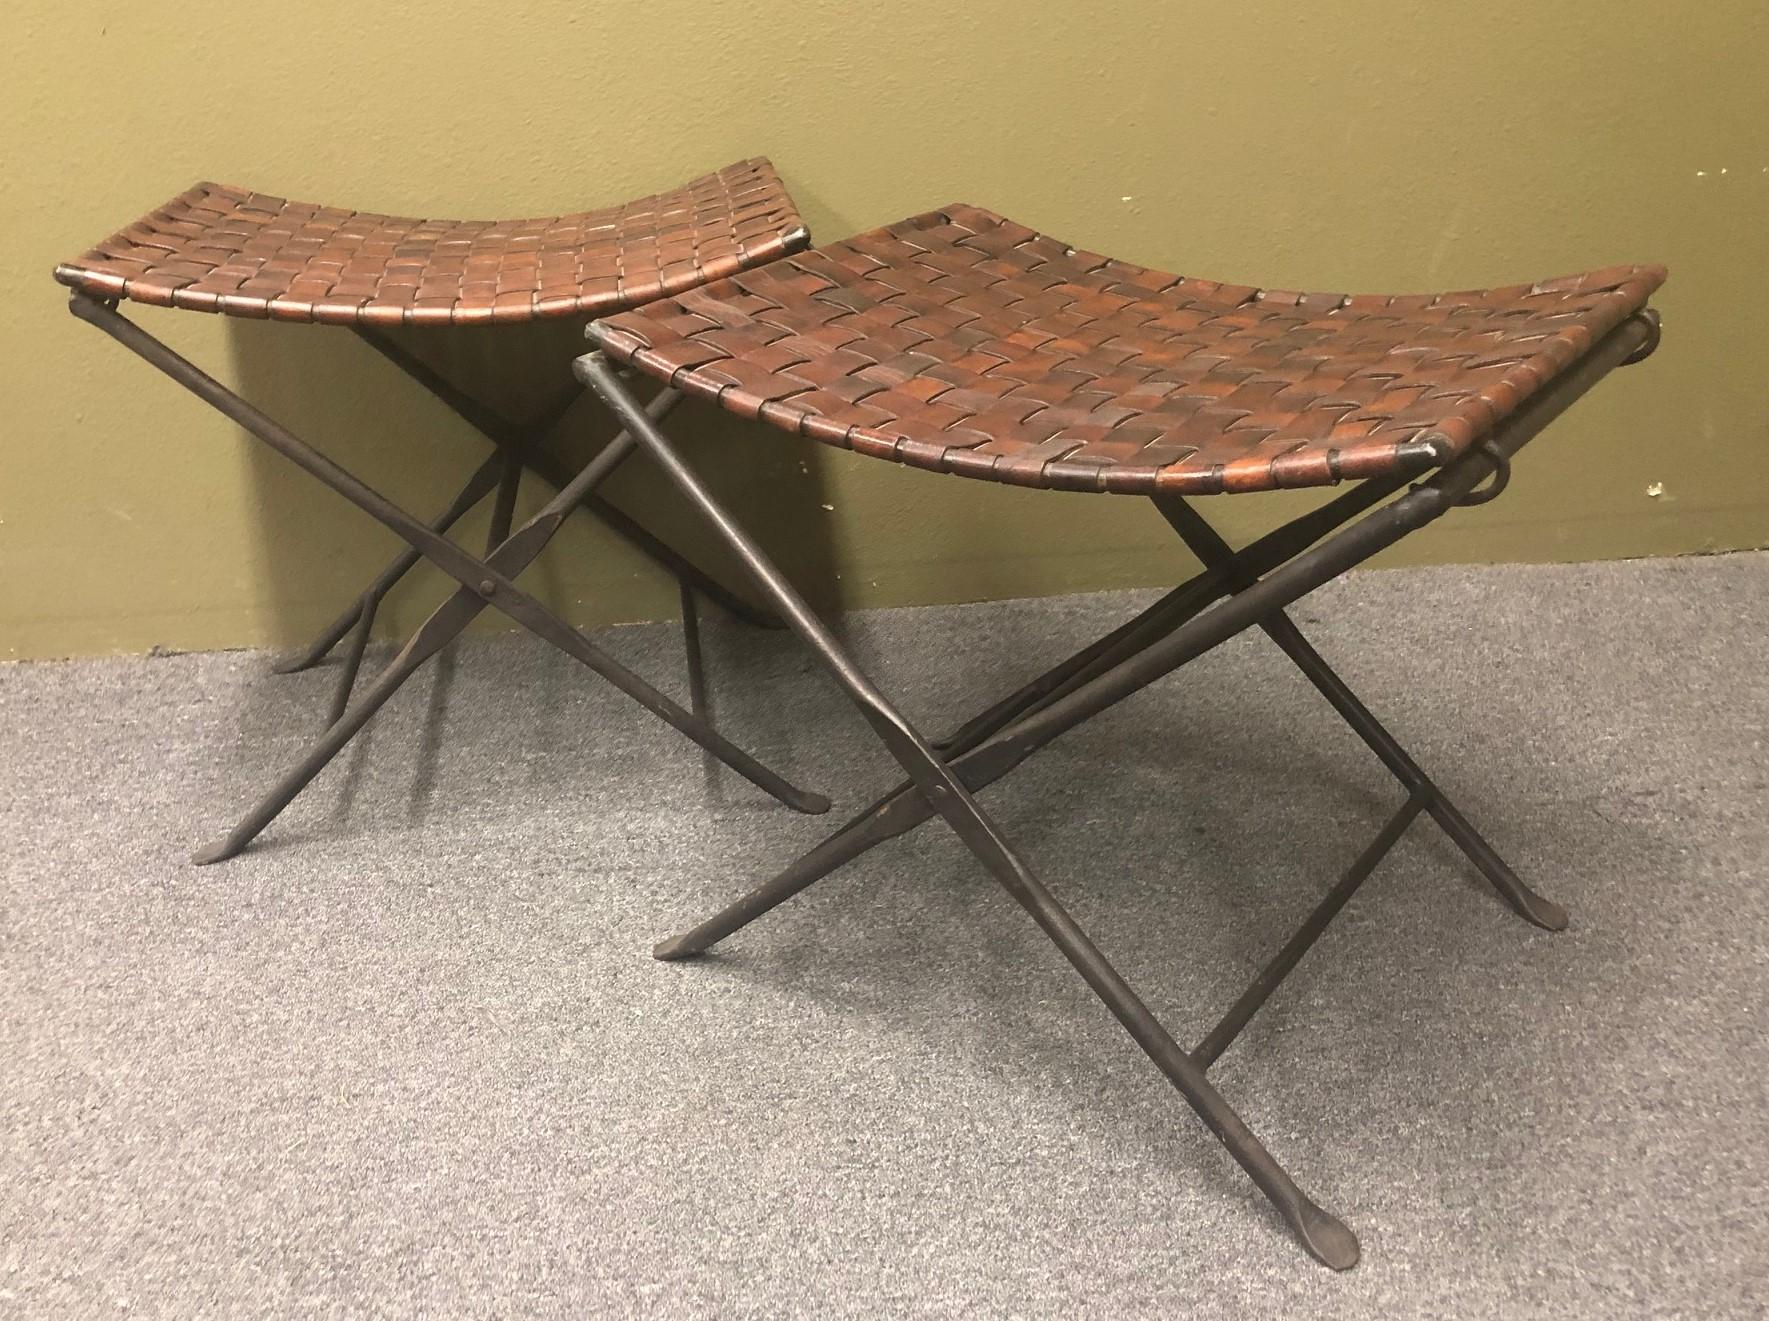 A striking pair of hand forged wrought iron and woven brown saddle leather folding stools / benches, circa 1970s. Solid, heavy and functional; great addition to any room!